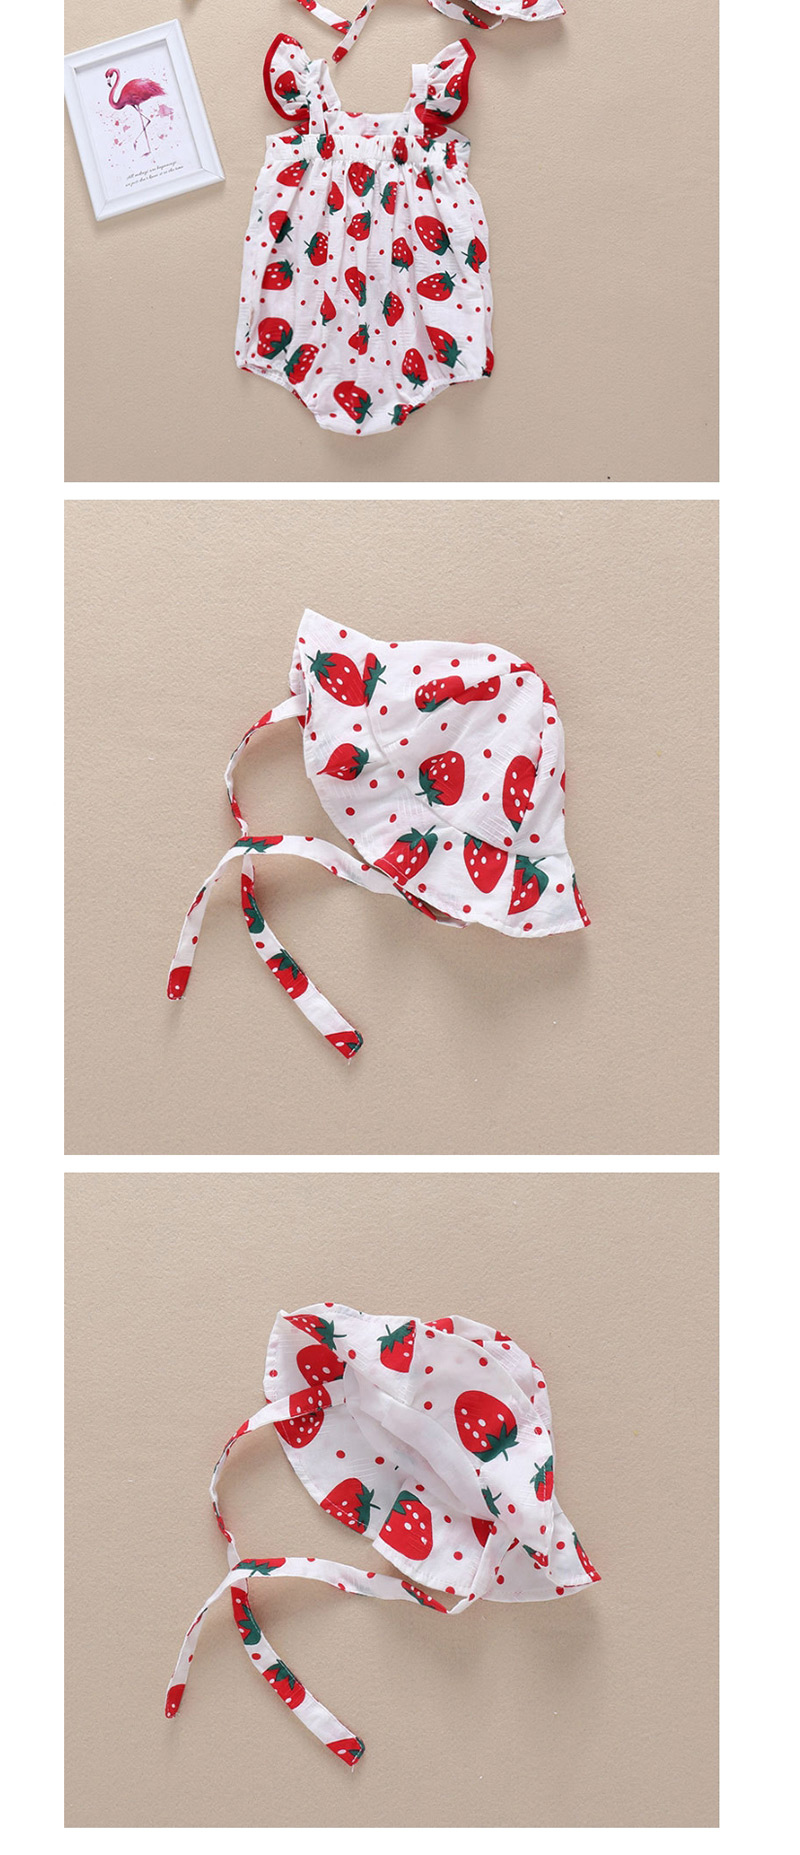 Fashion Red Strawberry Fruit Print Love Patch Pocket Baby Triangle Lace,Kids Clothing